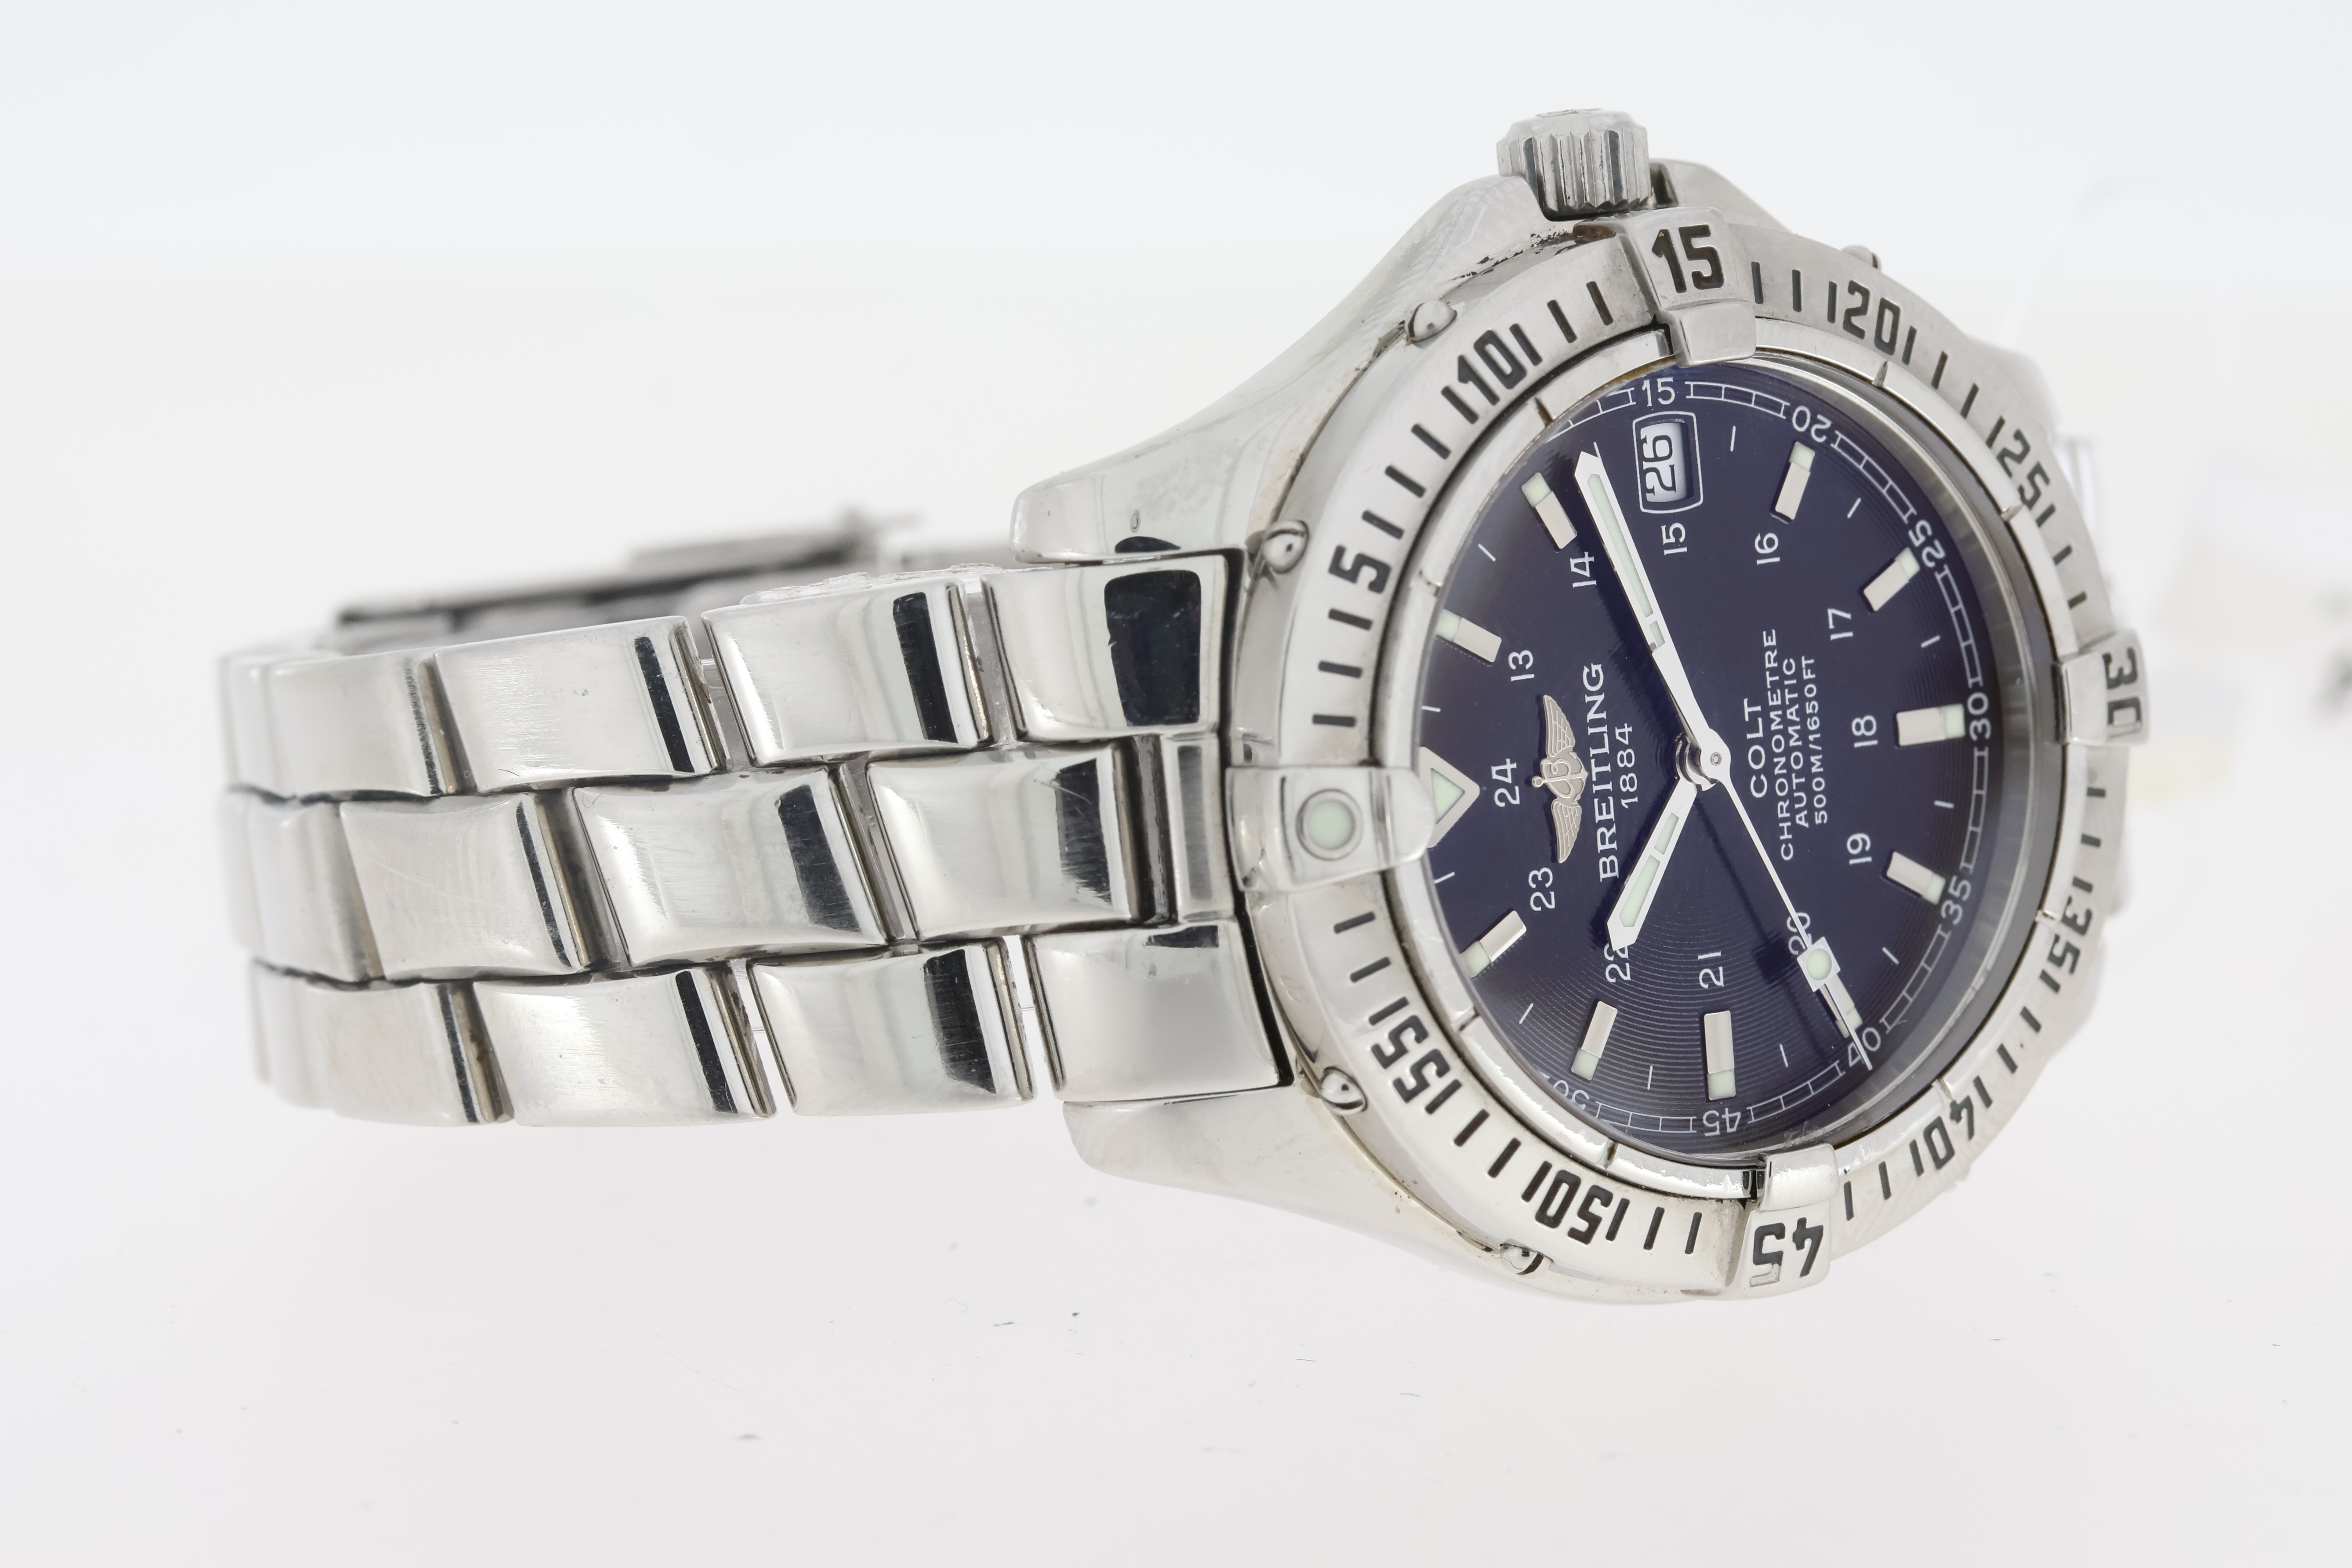 Breitling Colt Automatic with Box and Papers 2002 - Image 4 of 6